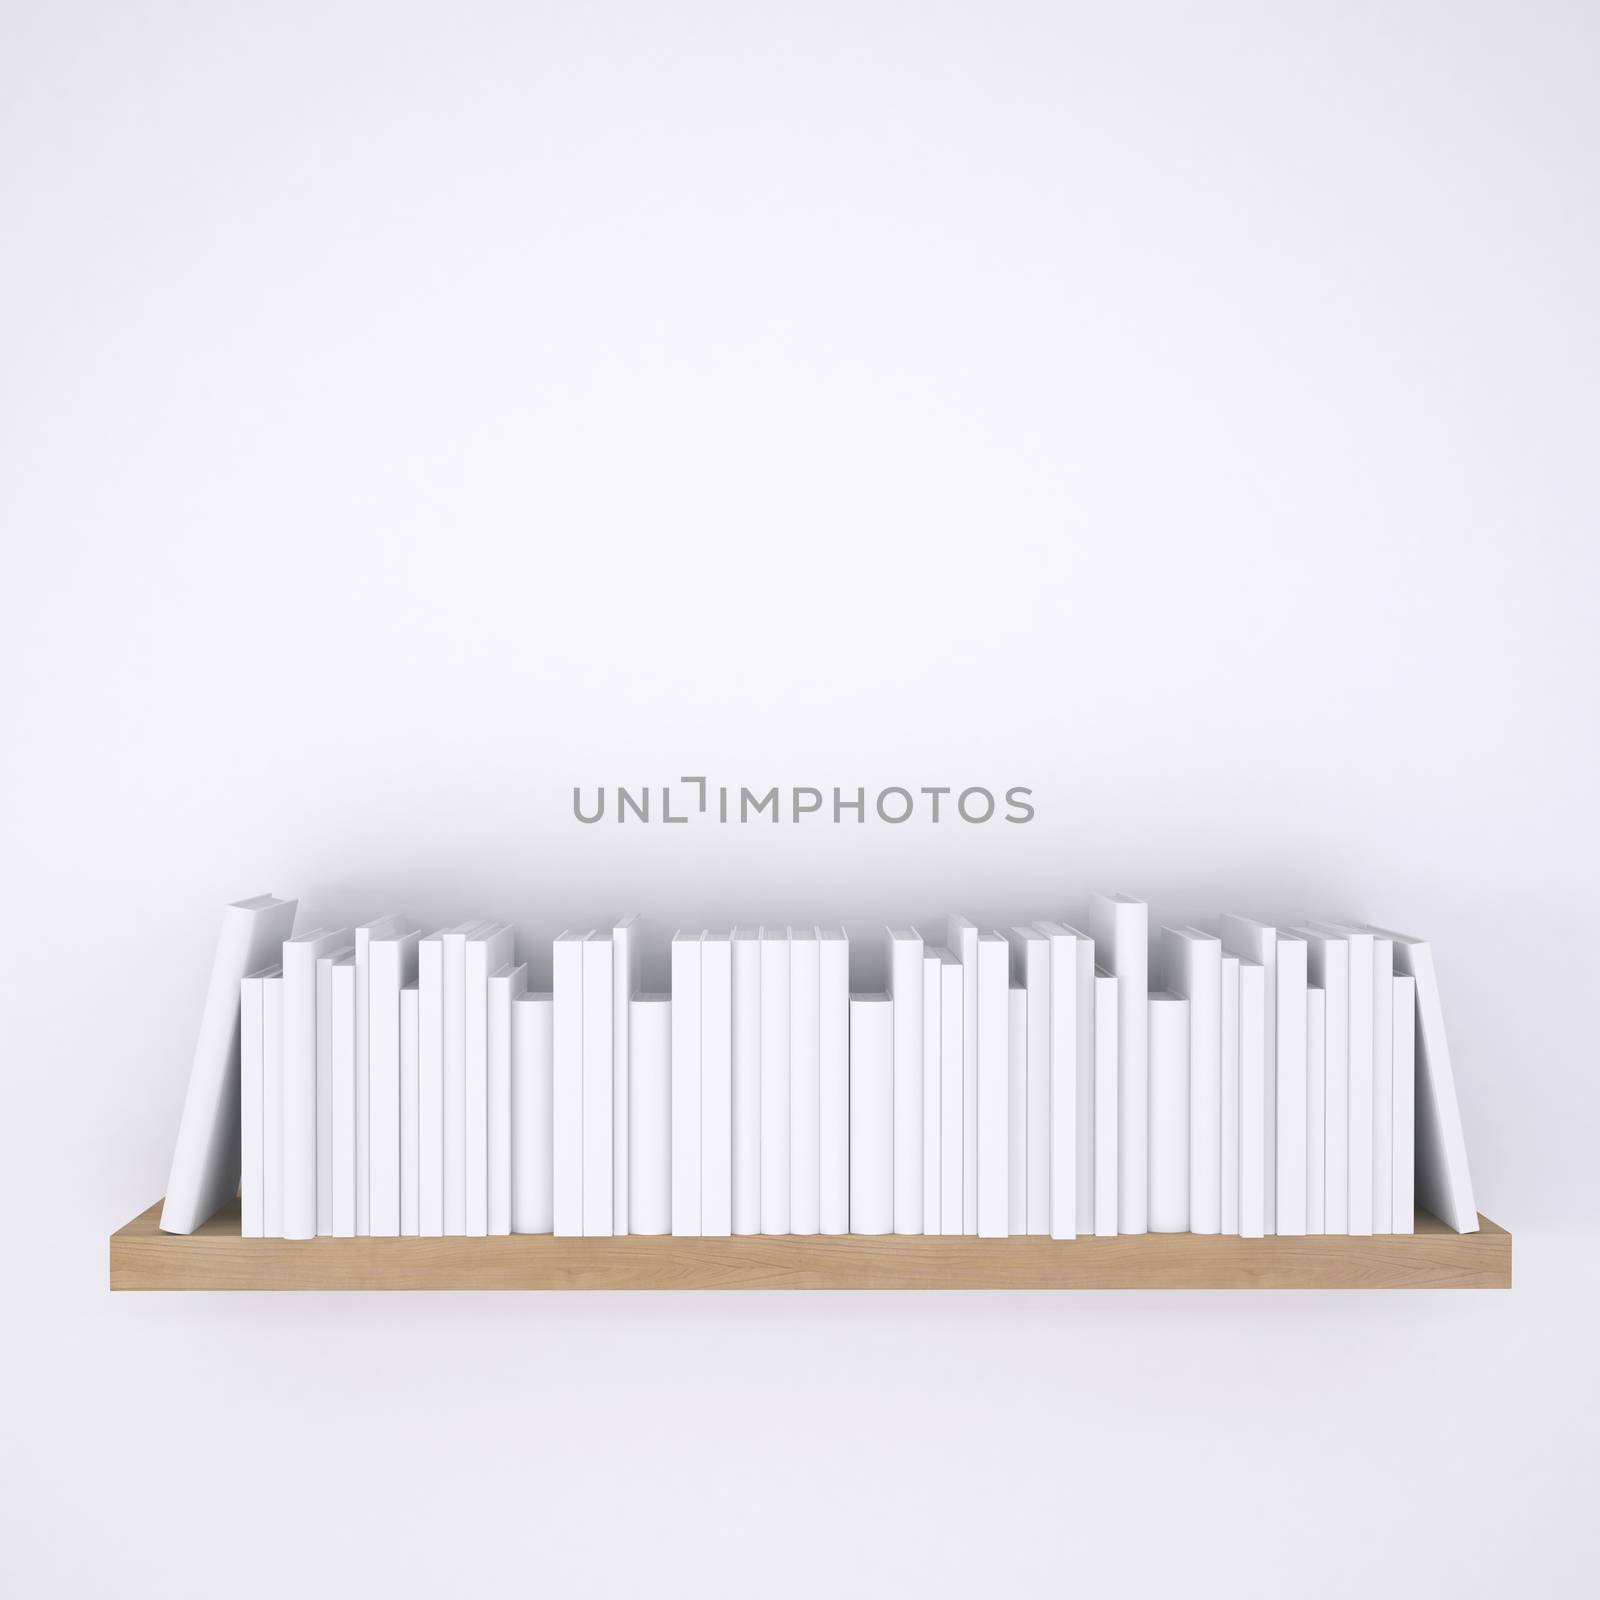 Wooden shelf with books on white wall background. 3d render